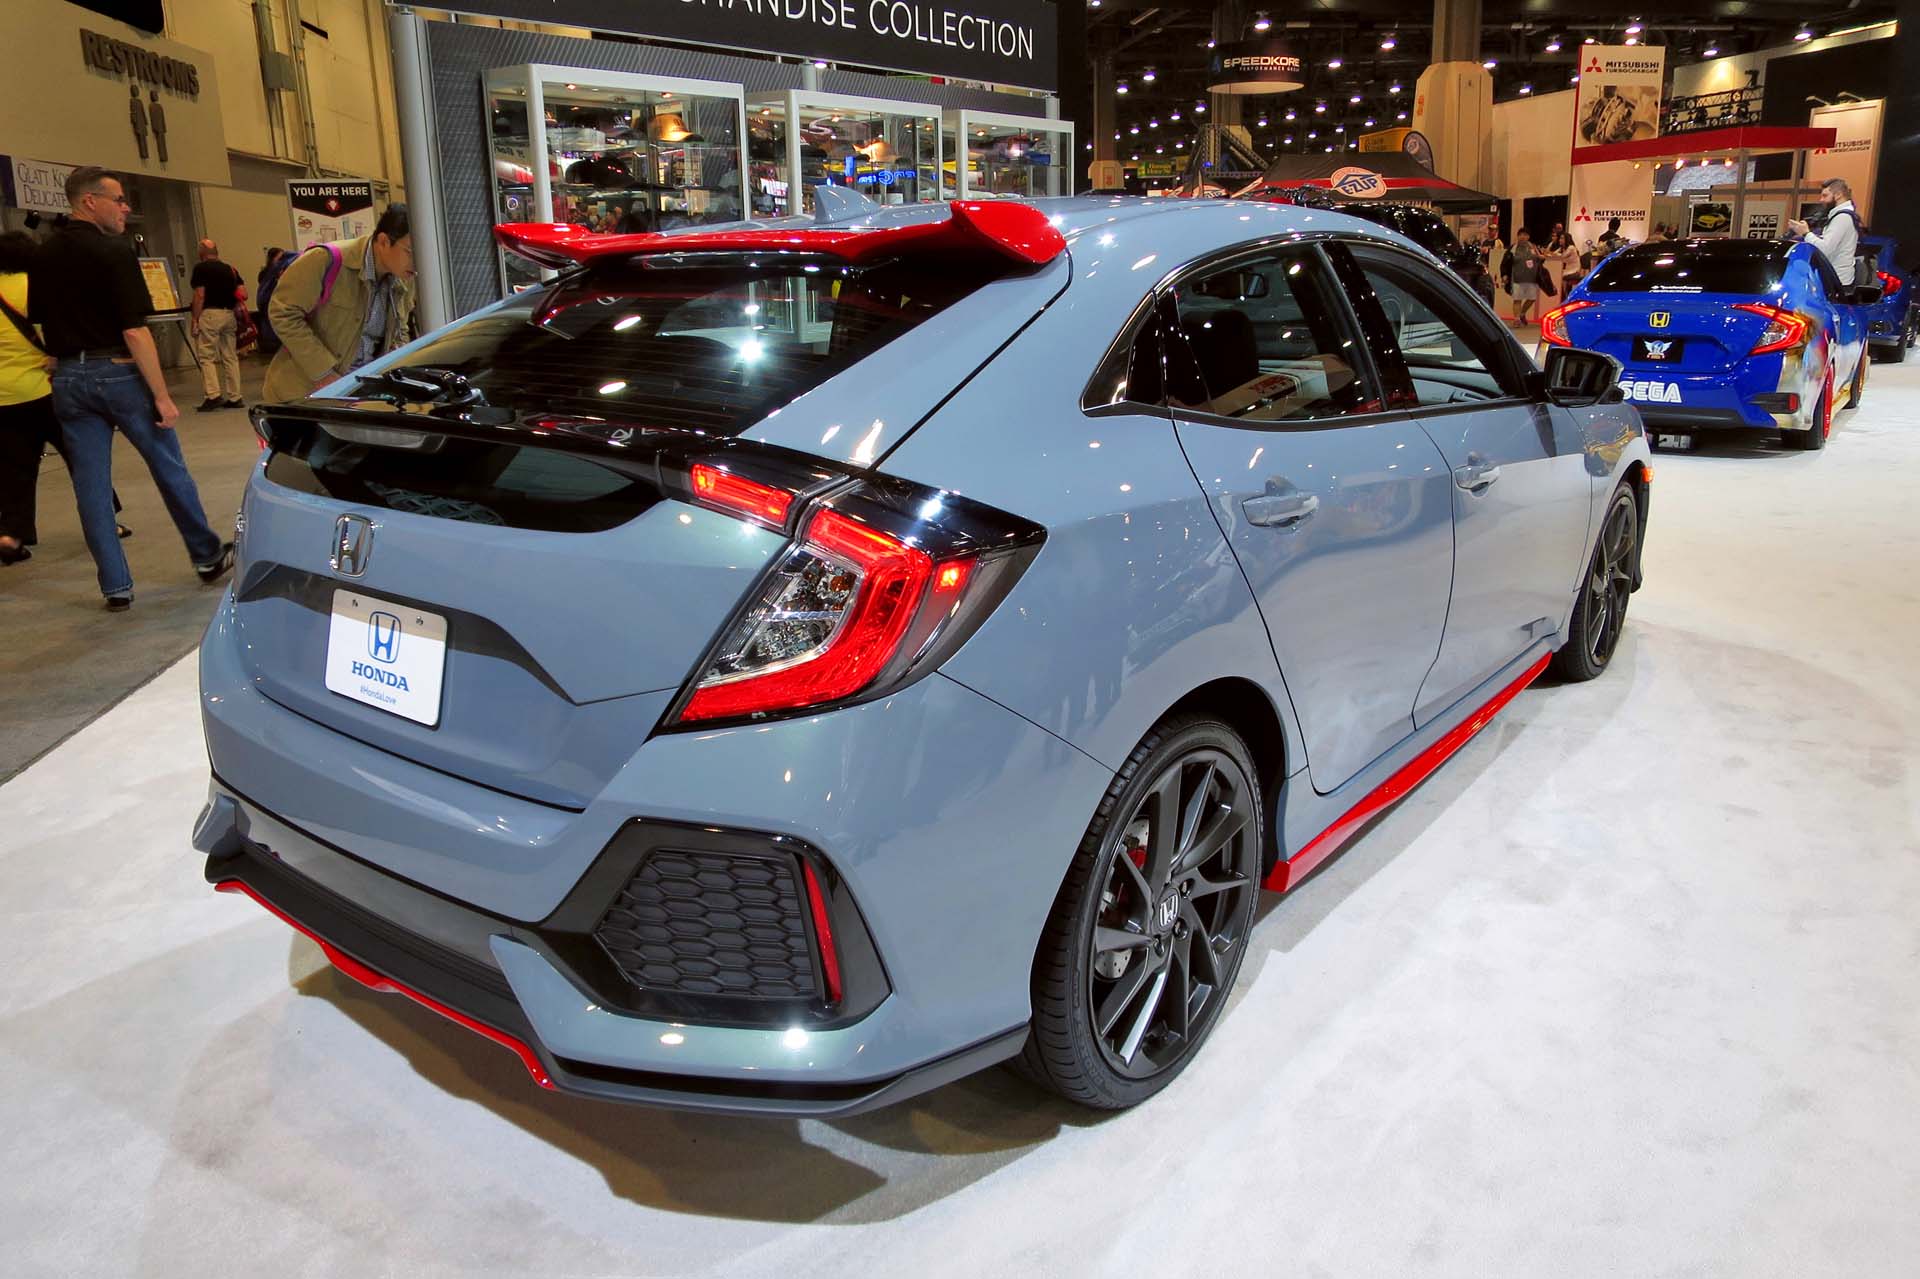 The Honda Civic Hatchback is displayed with all of its new optional accessories painted red.